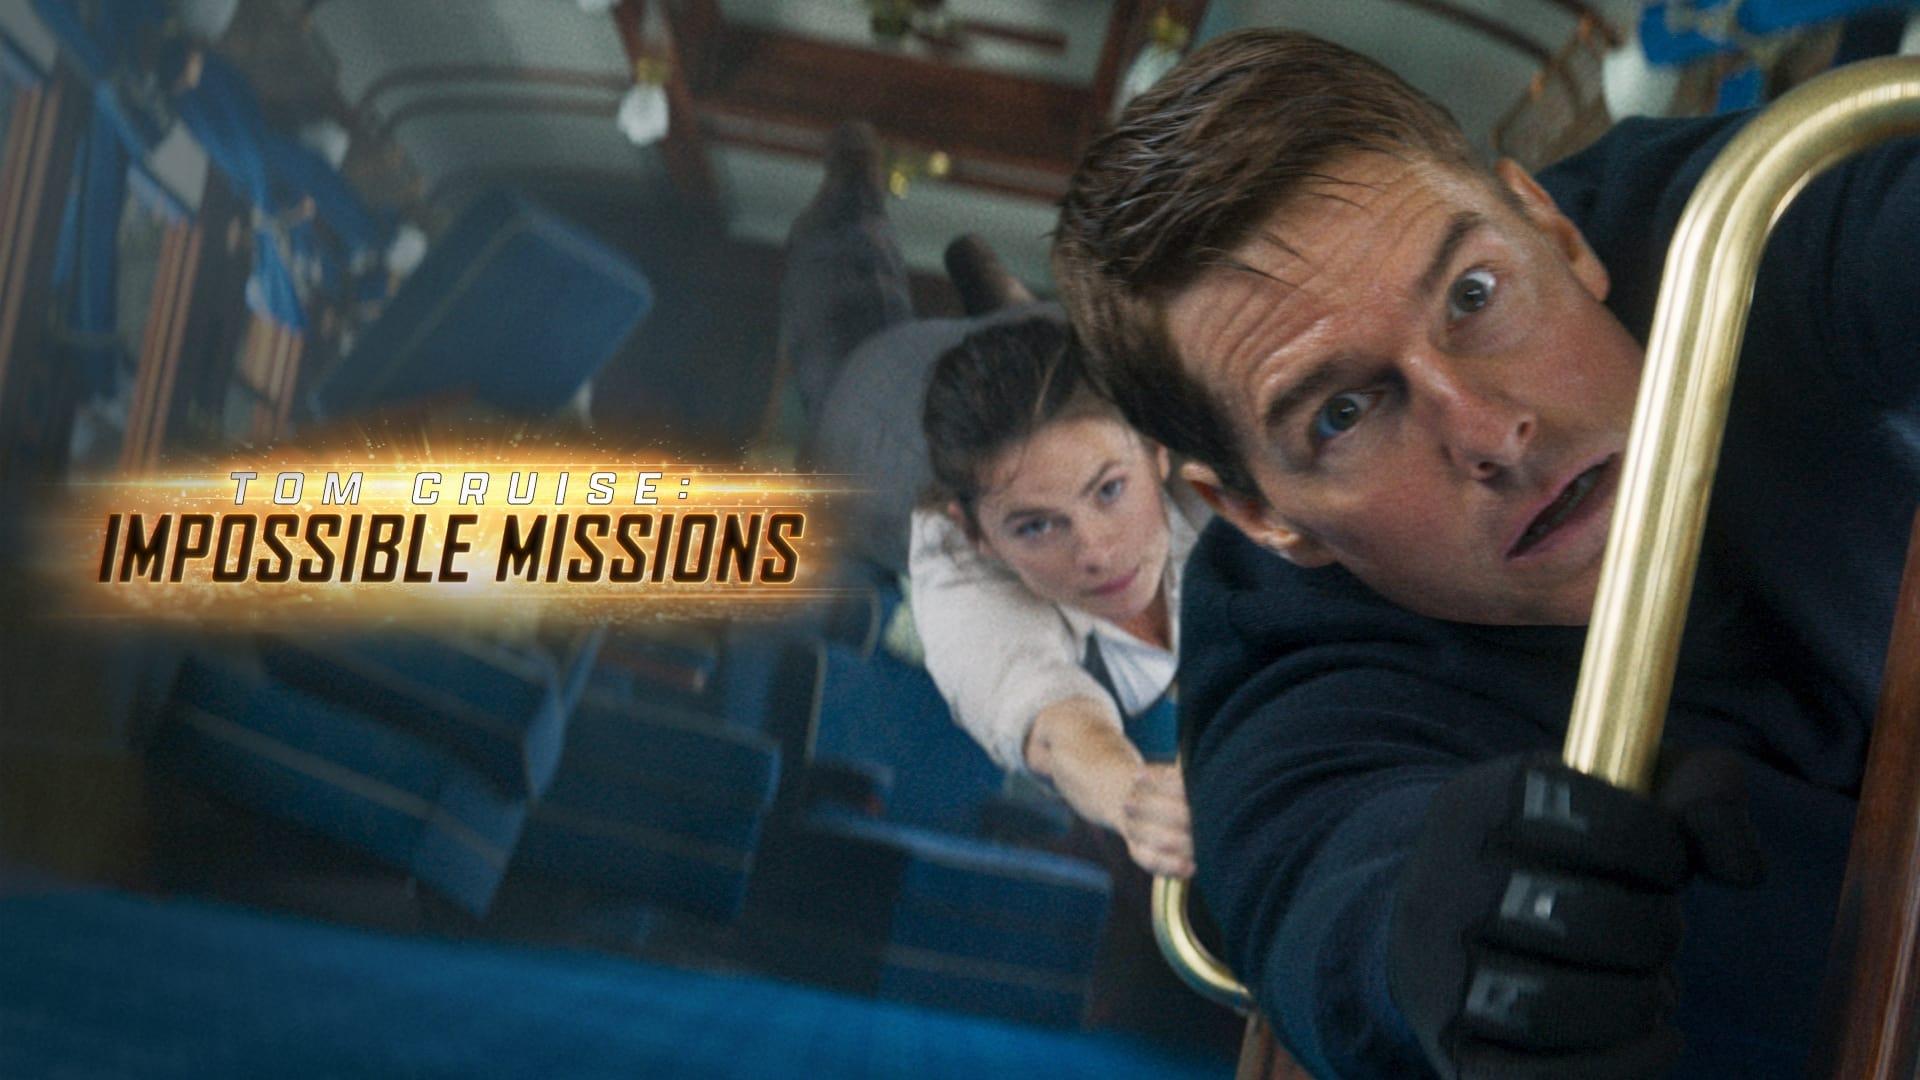 Tom Cruise: Impossible Missions backdrop